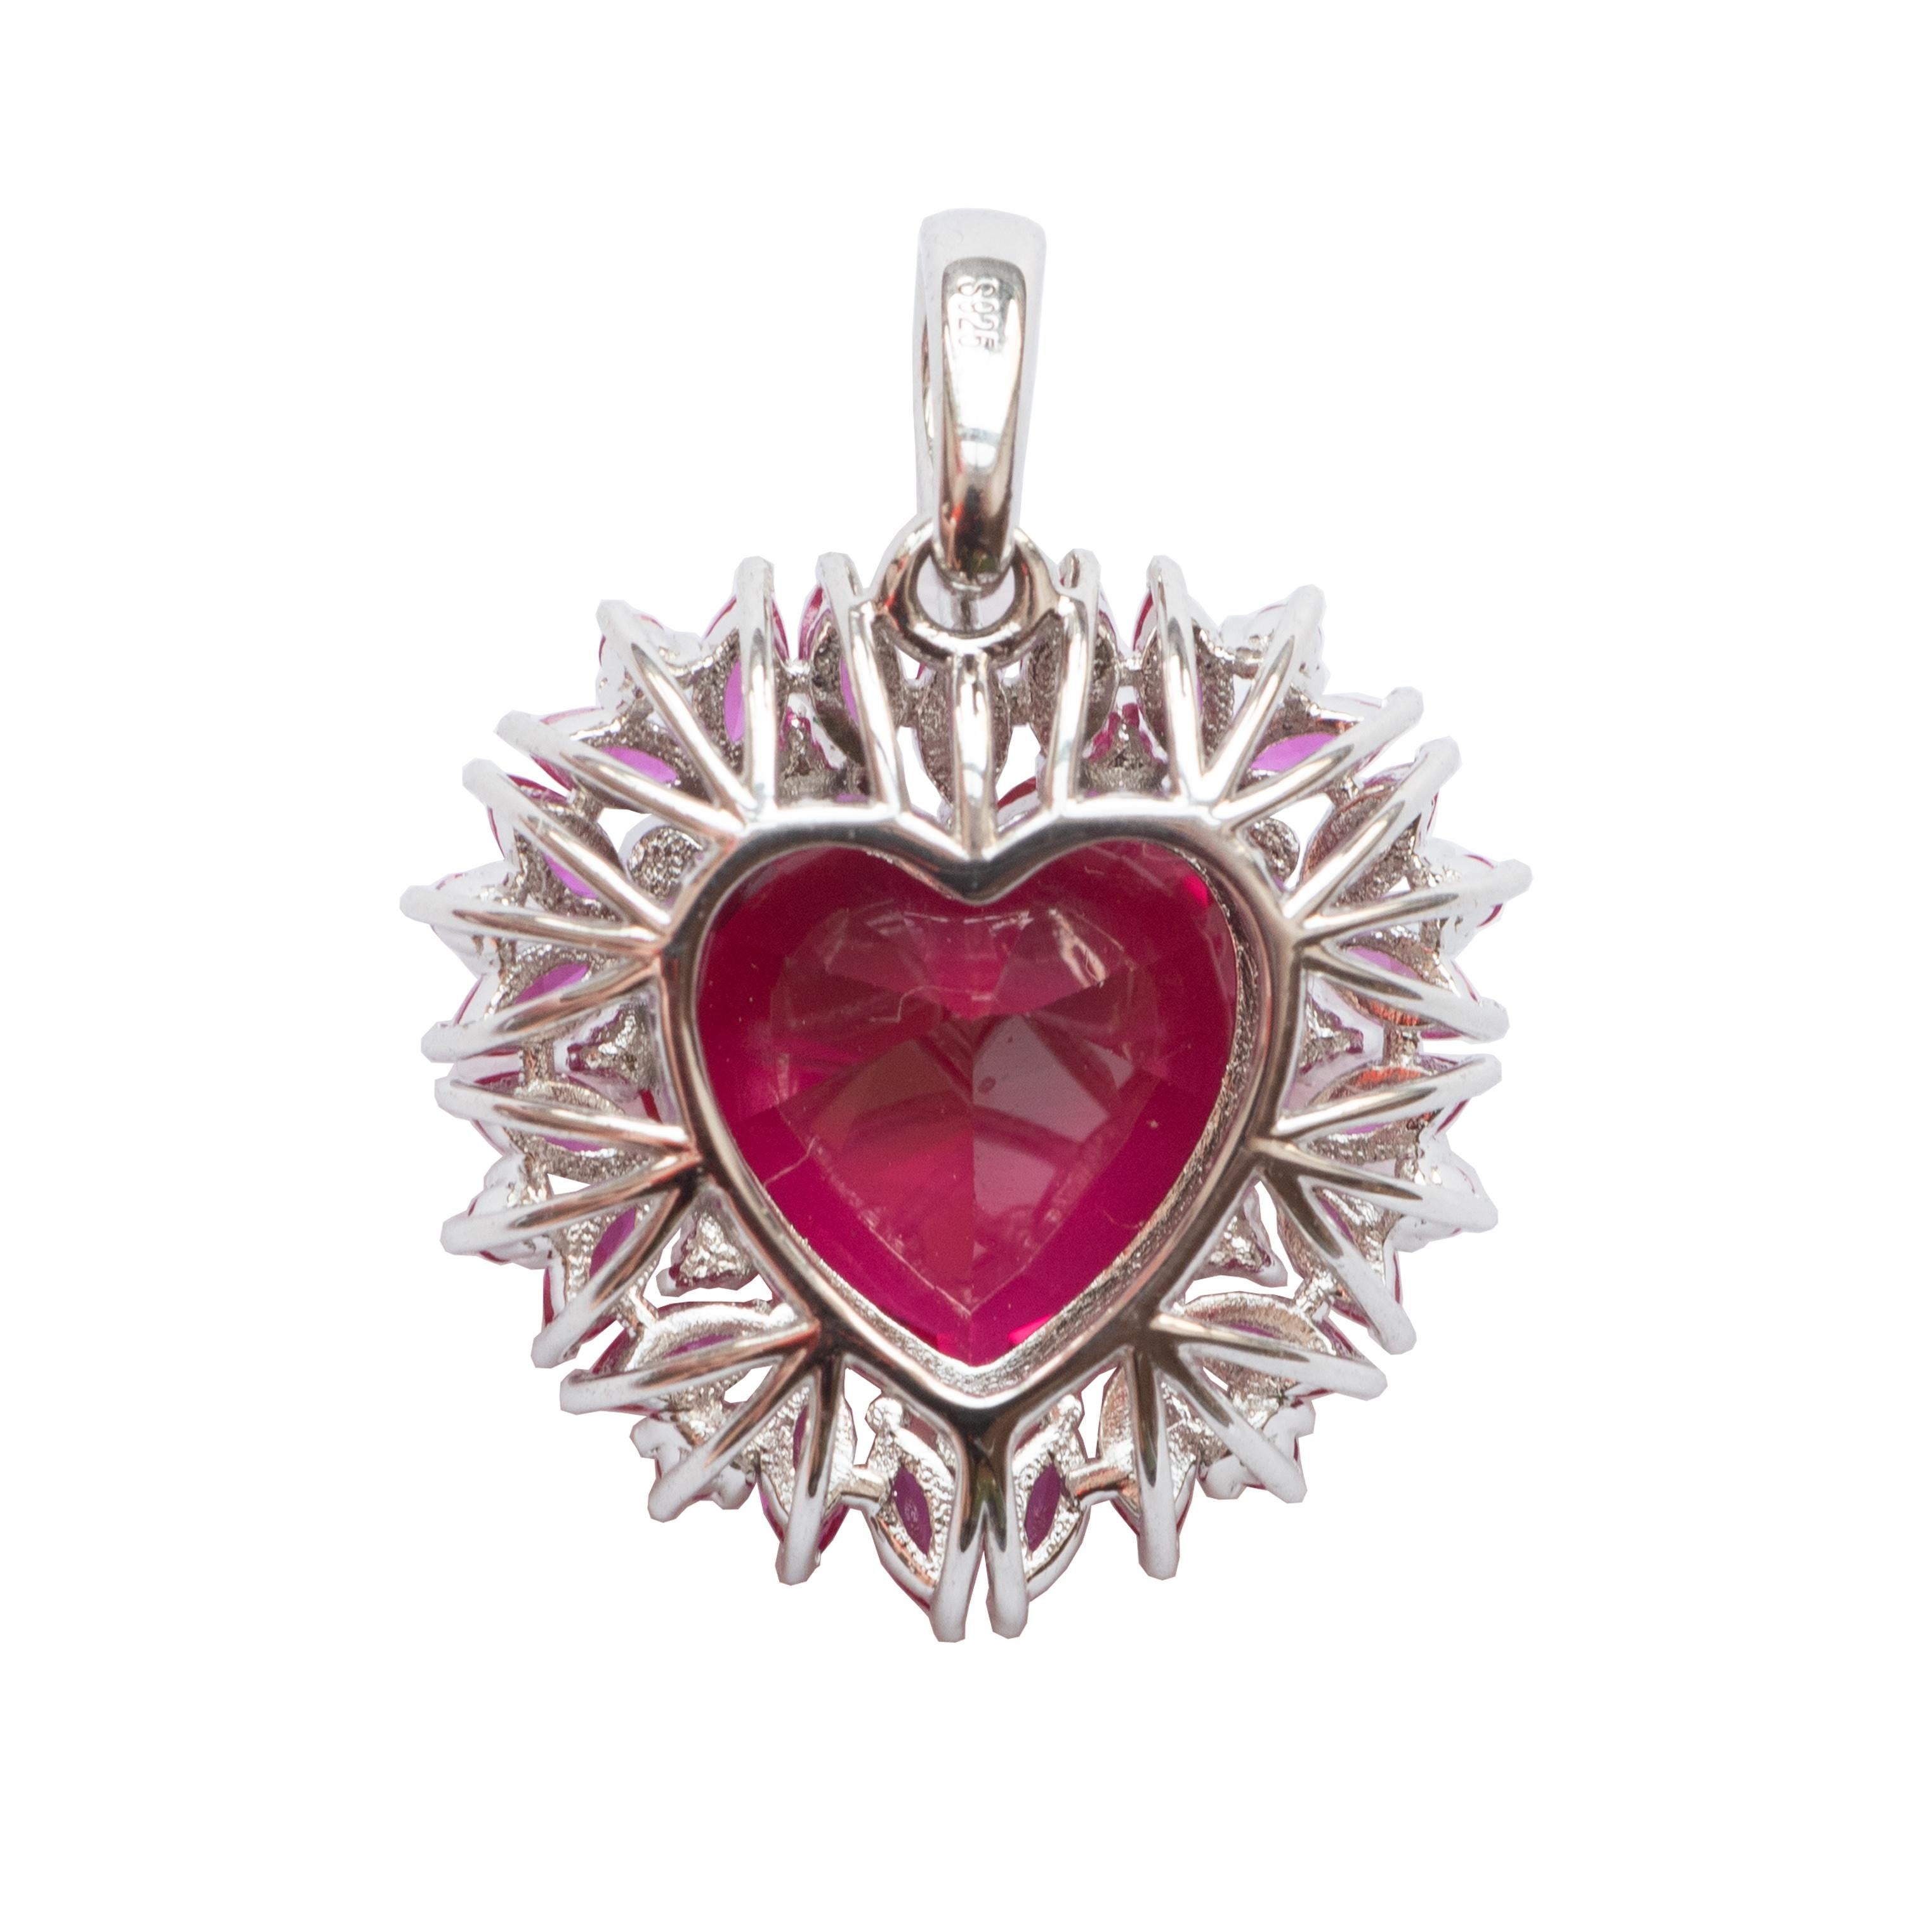 Ruby love, the heart is the centre of our emotions. Our inspiration for the beating heart pendant draws on tumultuous, passionate relationships. 

Rubies are for raw emotion, passion and courage. A hint of green emeralds to bring truth and love,